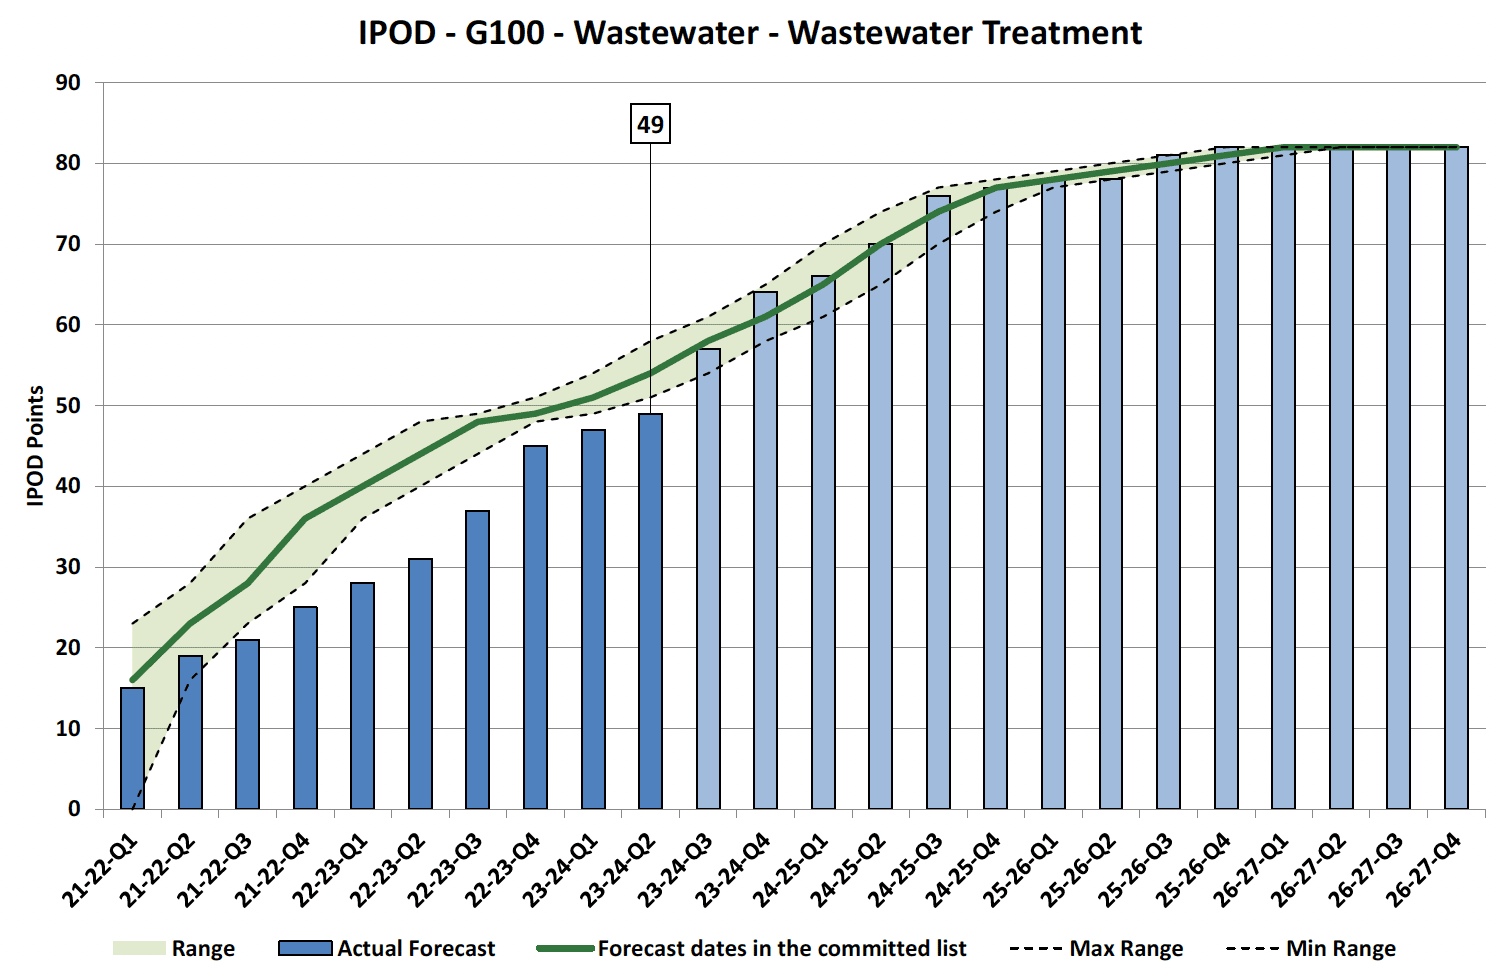 Chart showing IPOD points achieved or forecast for Project Acceptance milestone against target range for Wastewater Treatment Projects in Wastewater Portfolio